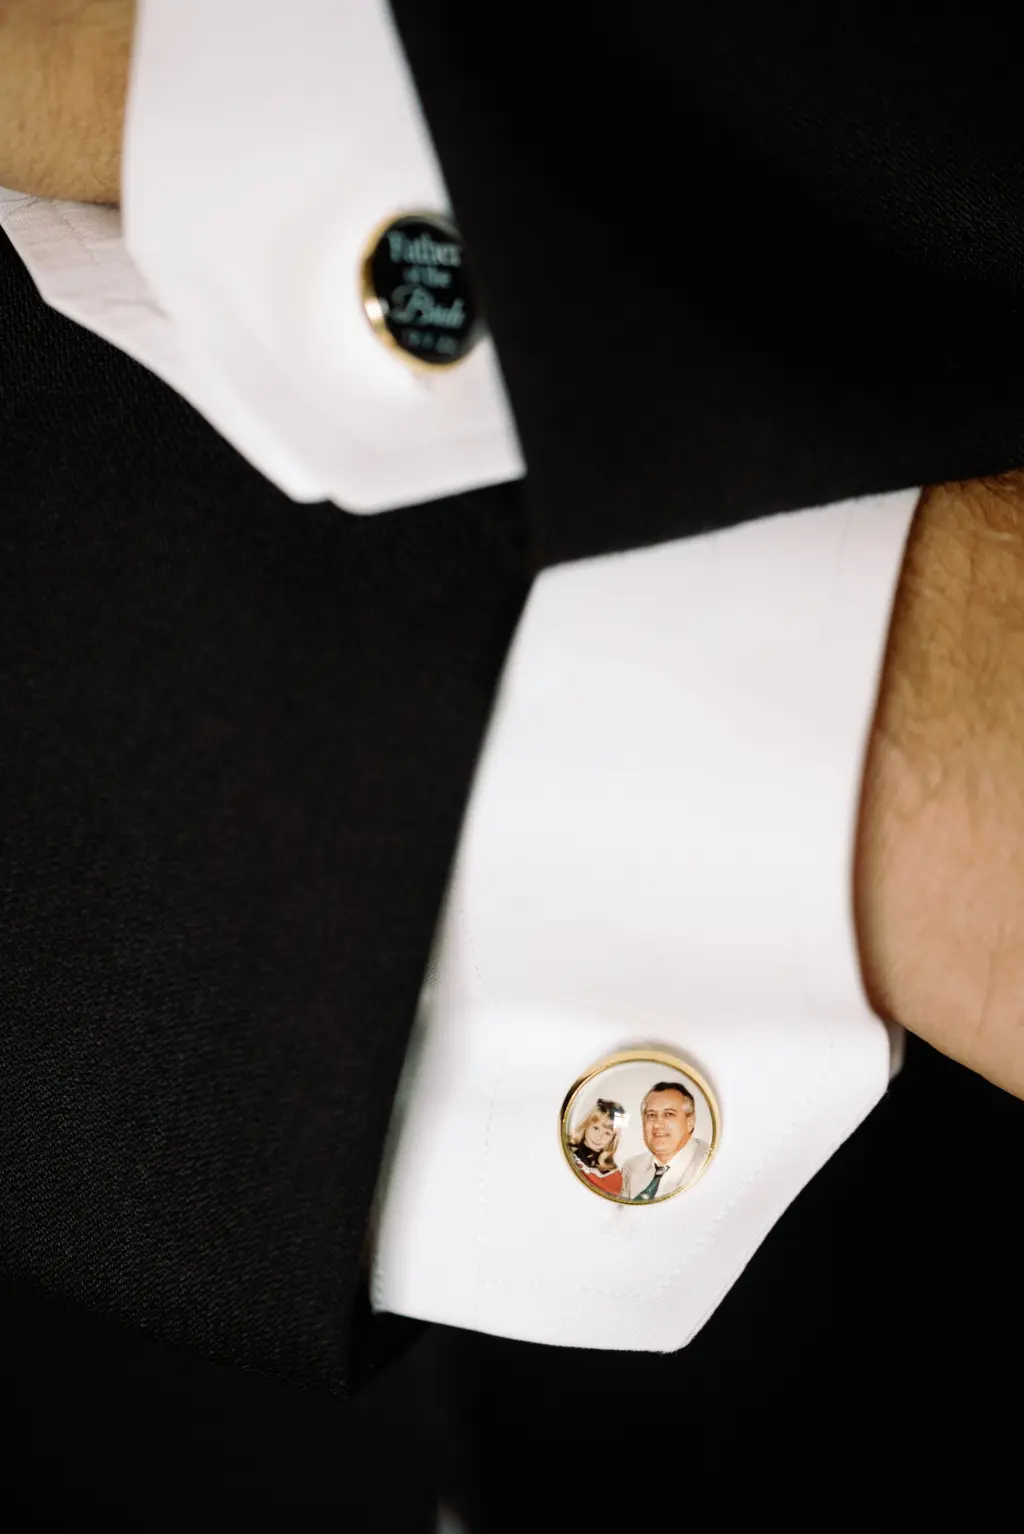 Custom Father of the Bride Wedding Cuff Links with Photograph